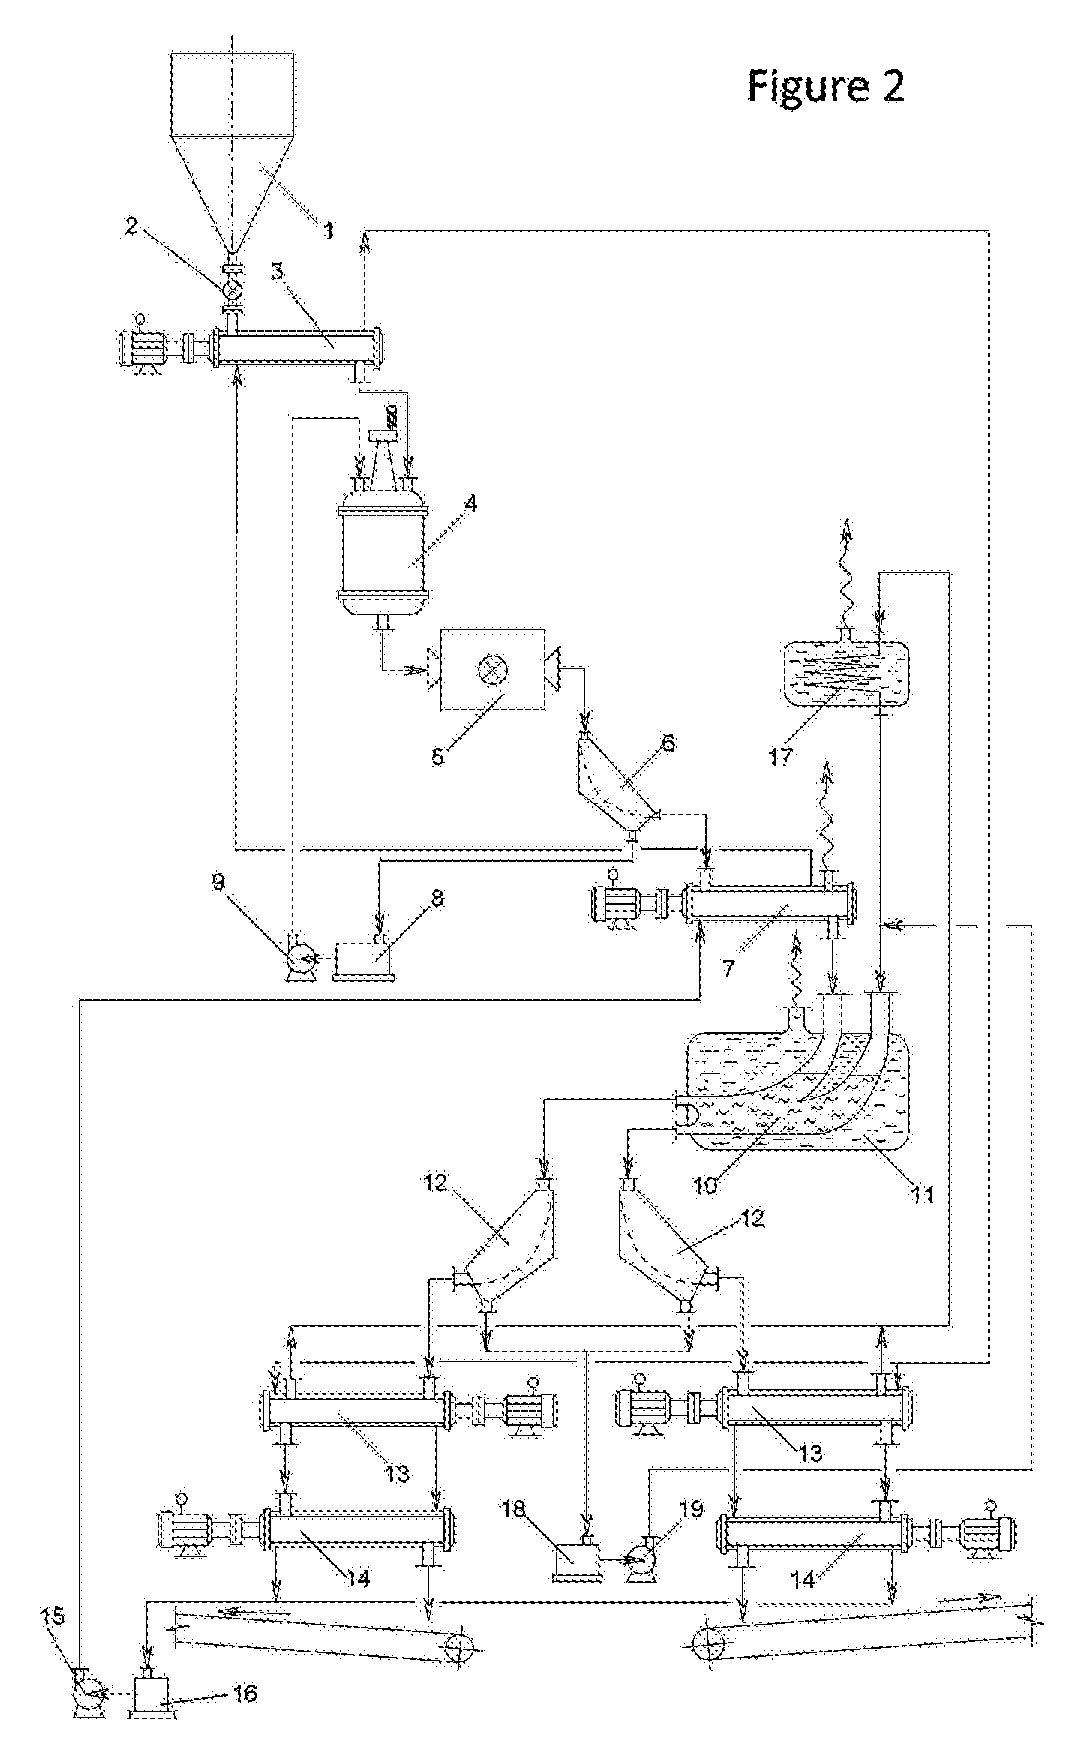 Method of mineral fuel beneficiation with subsequent delivery to the consumer by pipeline transportation